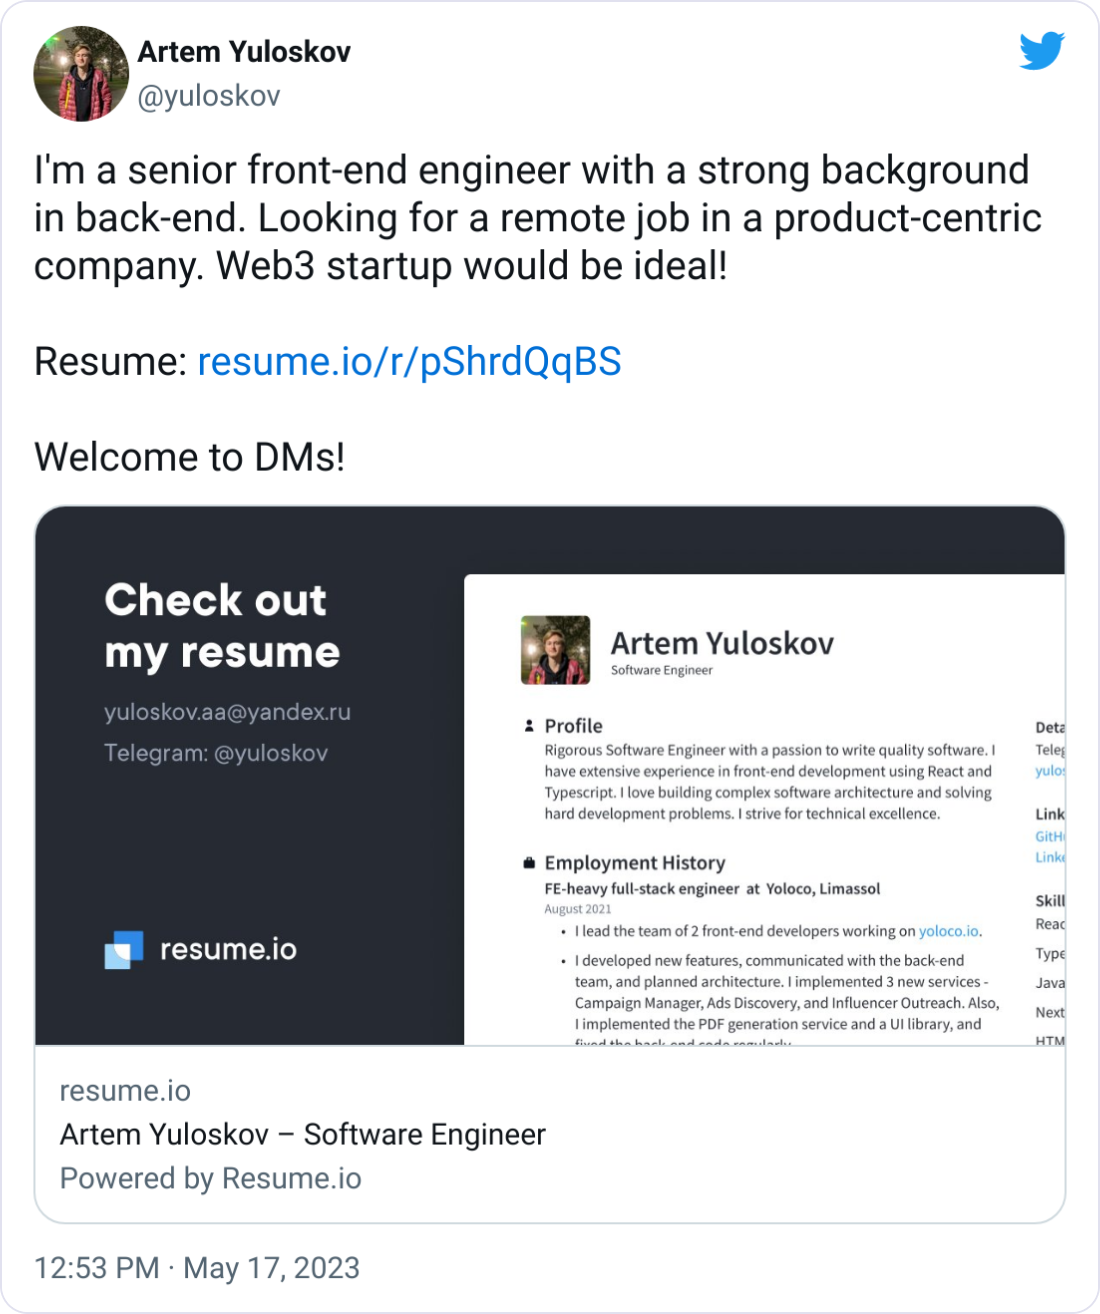 Artem Yuloskov @yuloskov I'm a senior front-end engineer with a strong background in back-end. Looking for a remote job in a product-centric company. Web3 startup would be ideal!  Resume: https://resume.io/r/pShrdQqBS  Welcome to DMs!